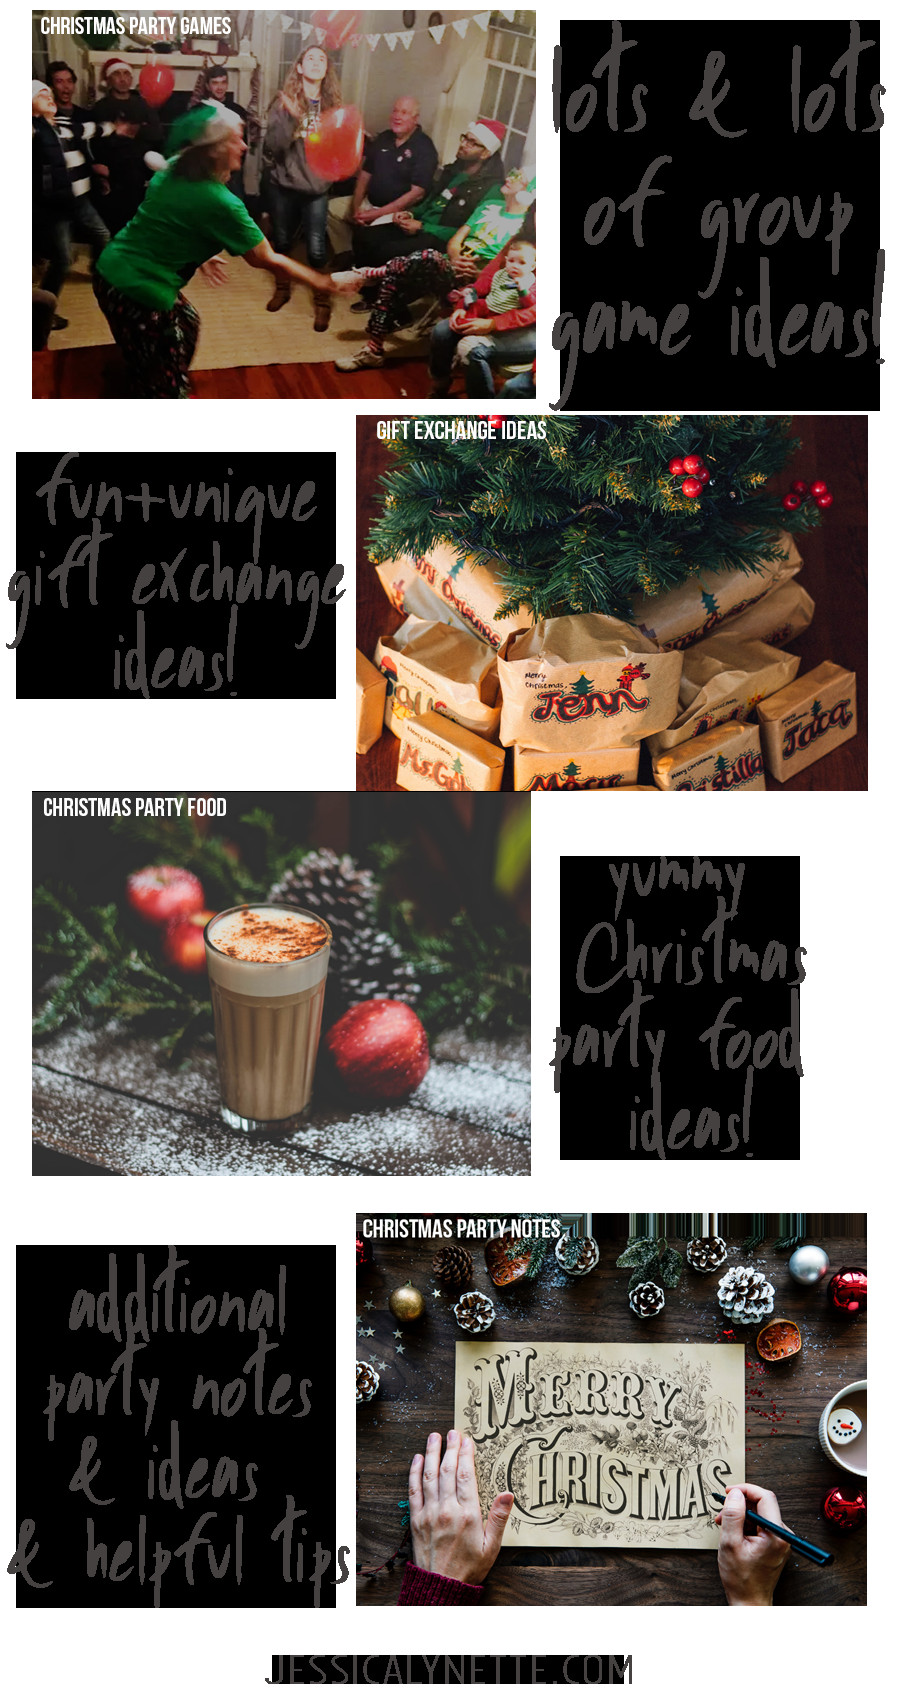 Christmas Party Menu Ideas For Large Groups
 Christmas Party Ideas and Games